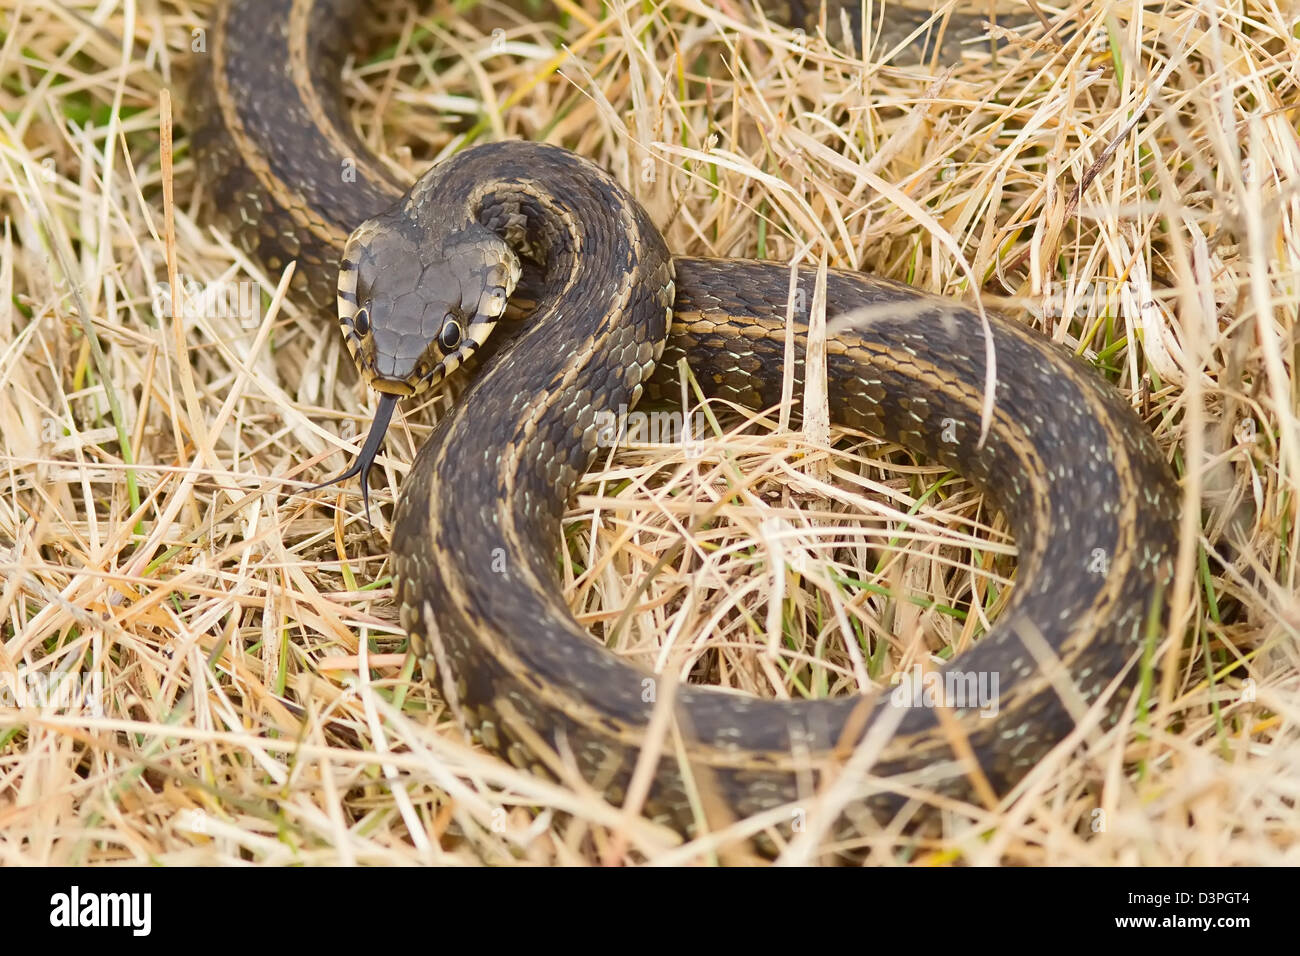 A Water-snake (natrix natrix) showing its forked tongue out of the water Stock Photo